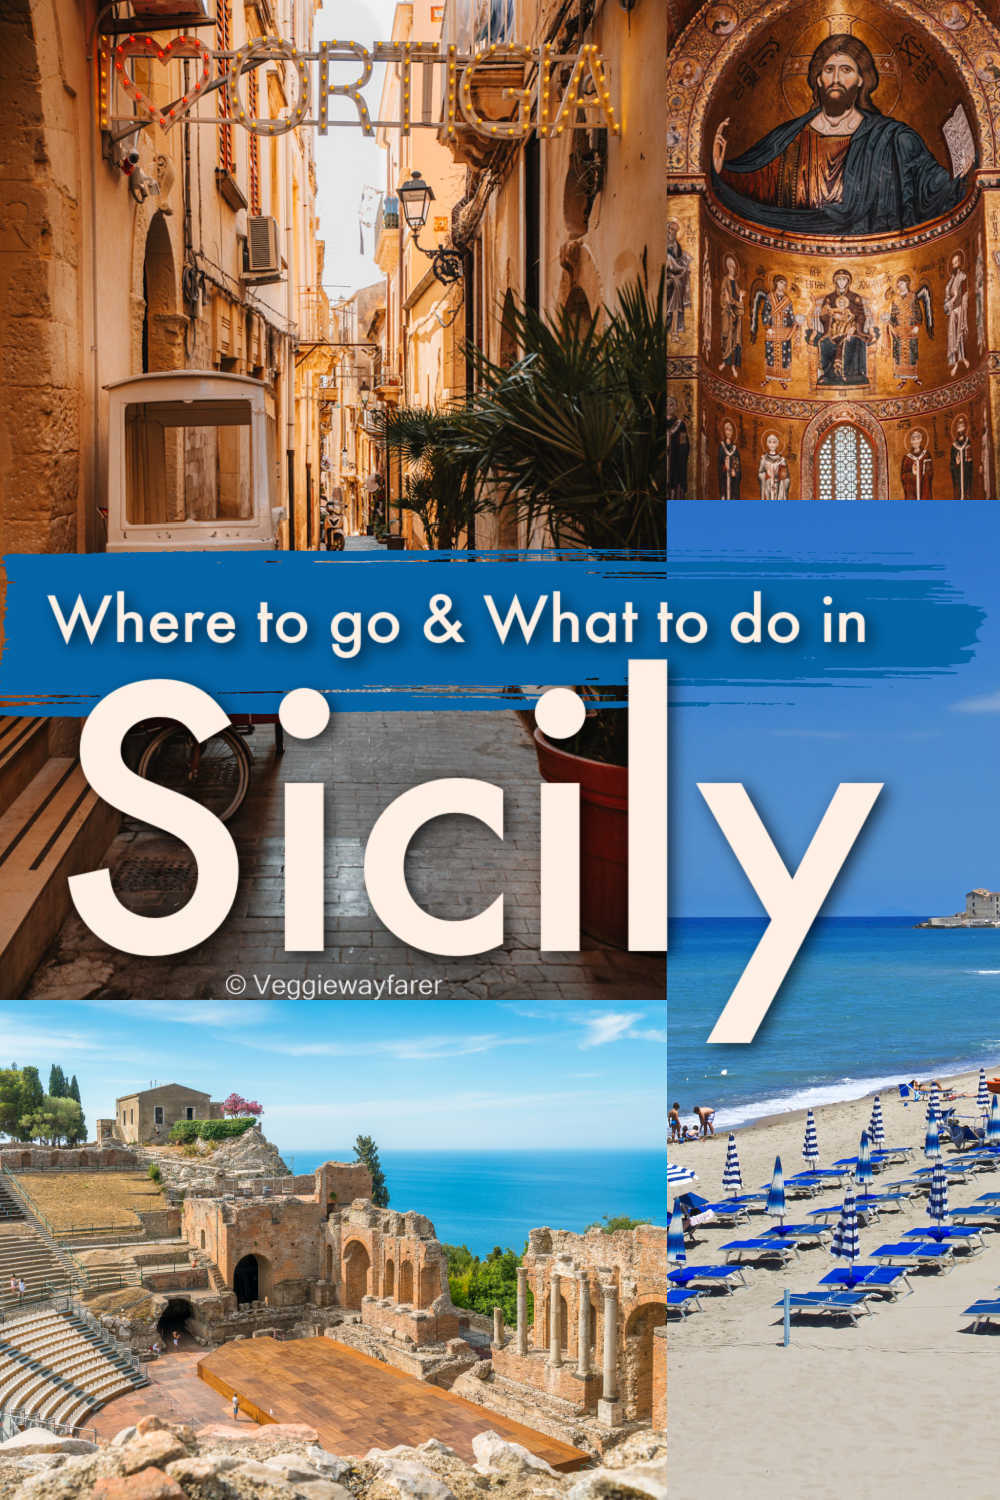 The best places to visit in Sicily to add to your itinerary.Discover why Sicily is the perfect destination in Italy. Here are Sicily's top attractions and landmarks, what to do in each of them, tours, and where to go. Plus, where to stay in Sicily, best cities and hotels for your holiday, and info about planning your journey. From renting a car to Sicilian food to try. Sicily Italy | Sicily places to stay | Sicily hotels | Catania | Palermo | Taormina | Cefalu | Sicily things to do |